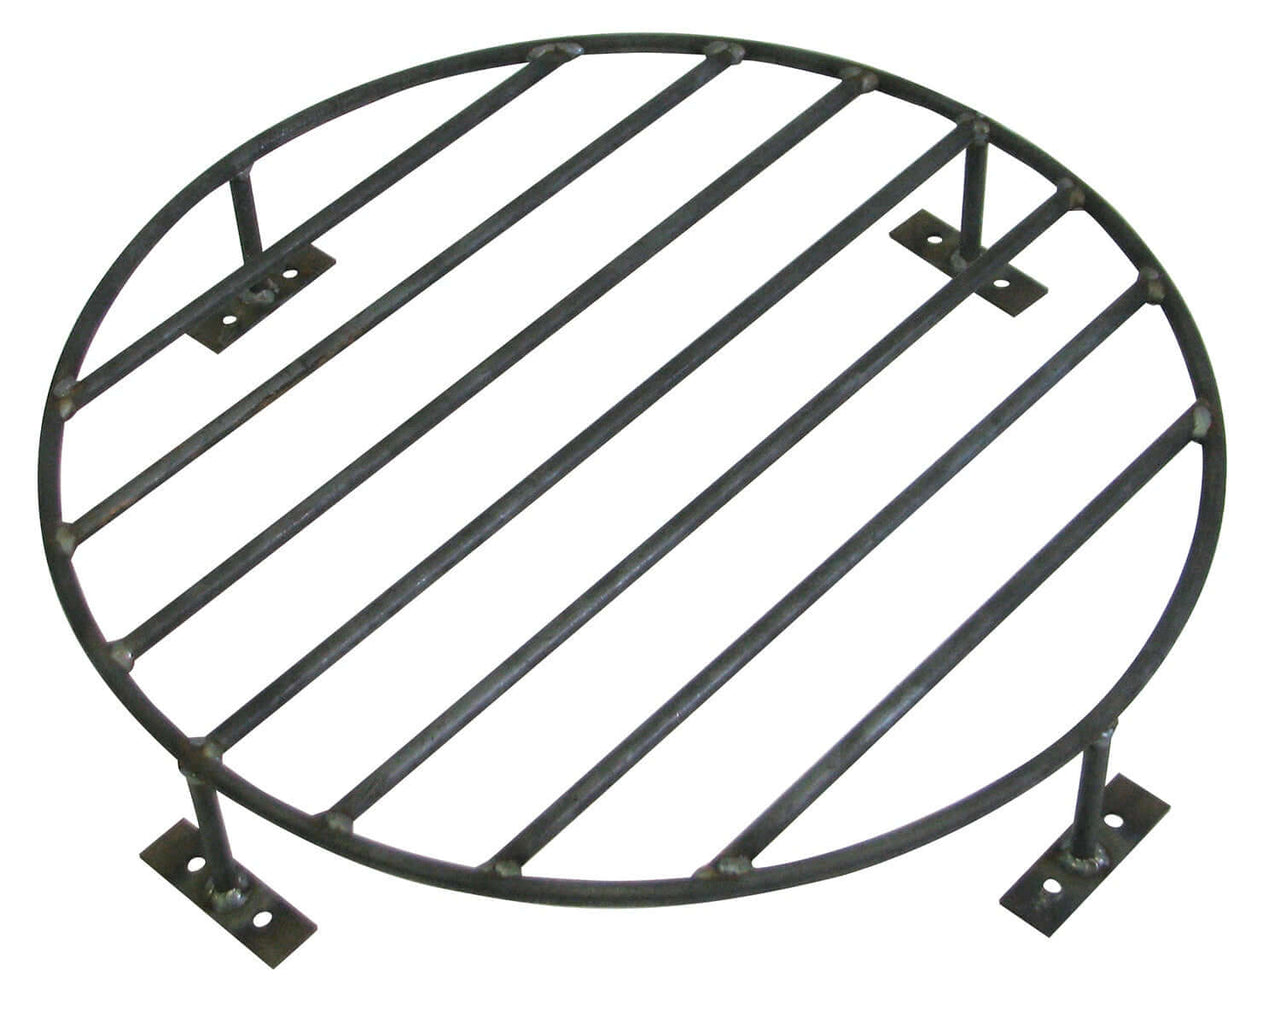 Premium Heavy-Duty Steel 24” Grate for Outdoor Fire Pits, Above Ground Fire Grate